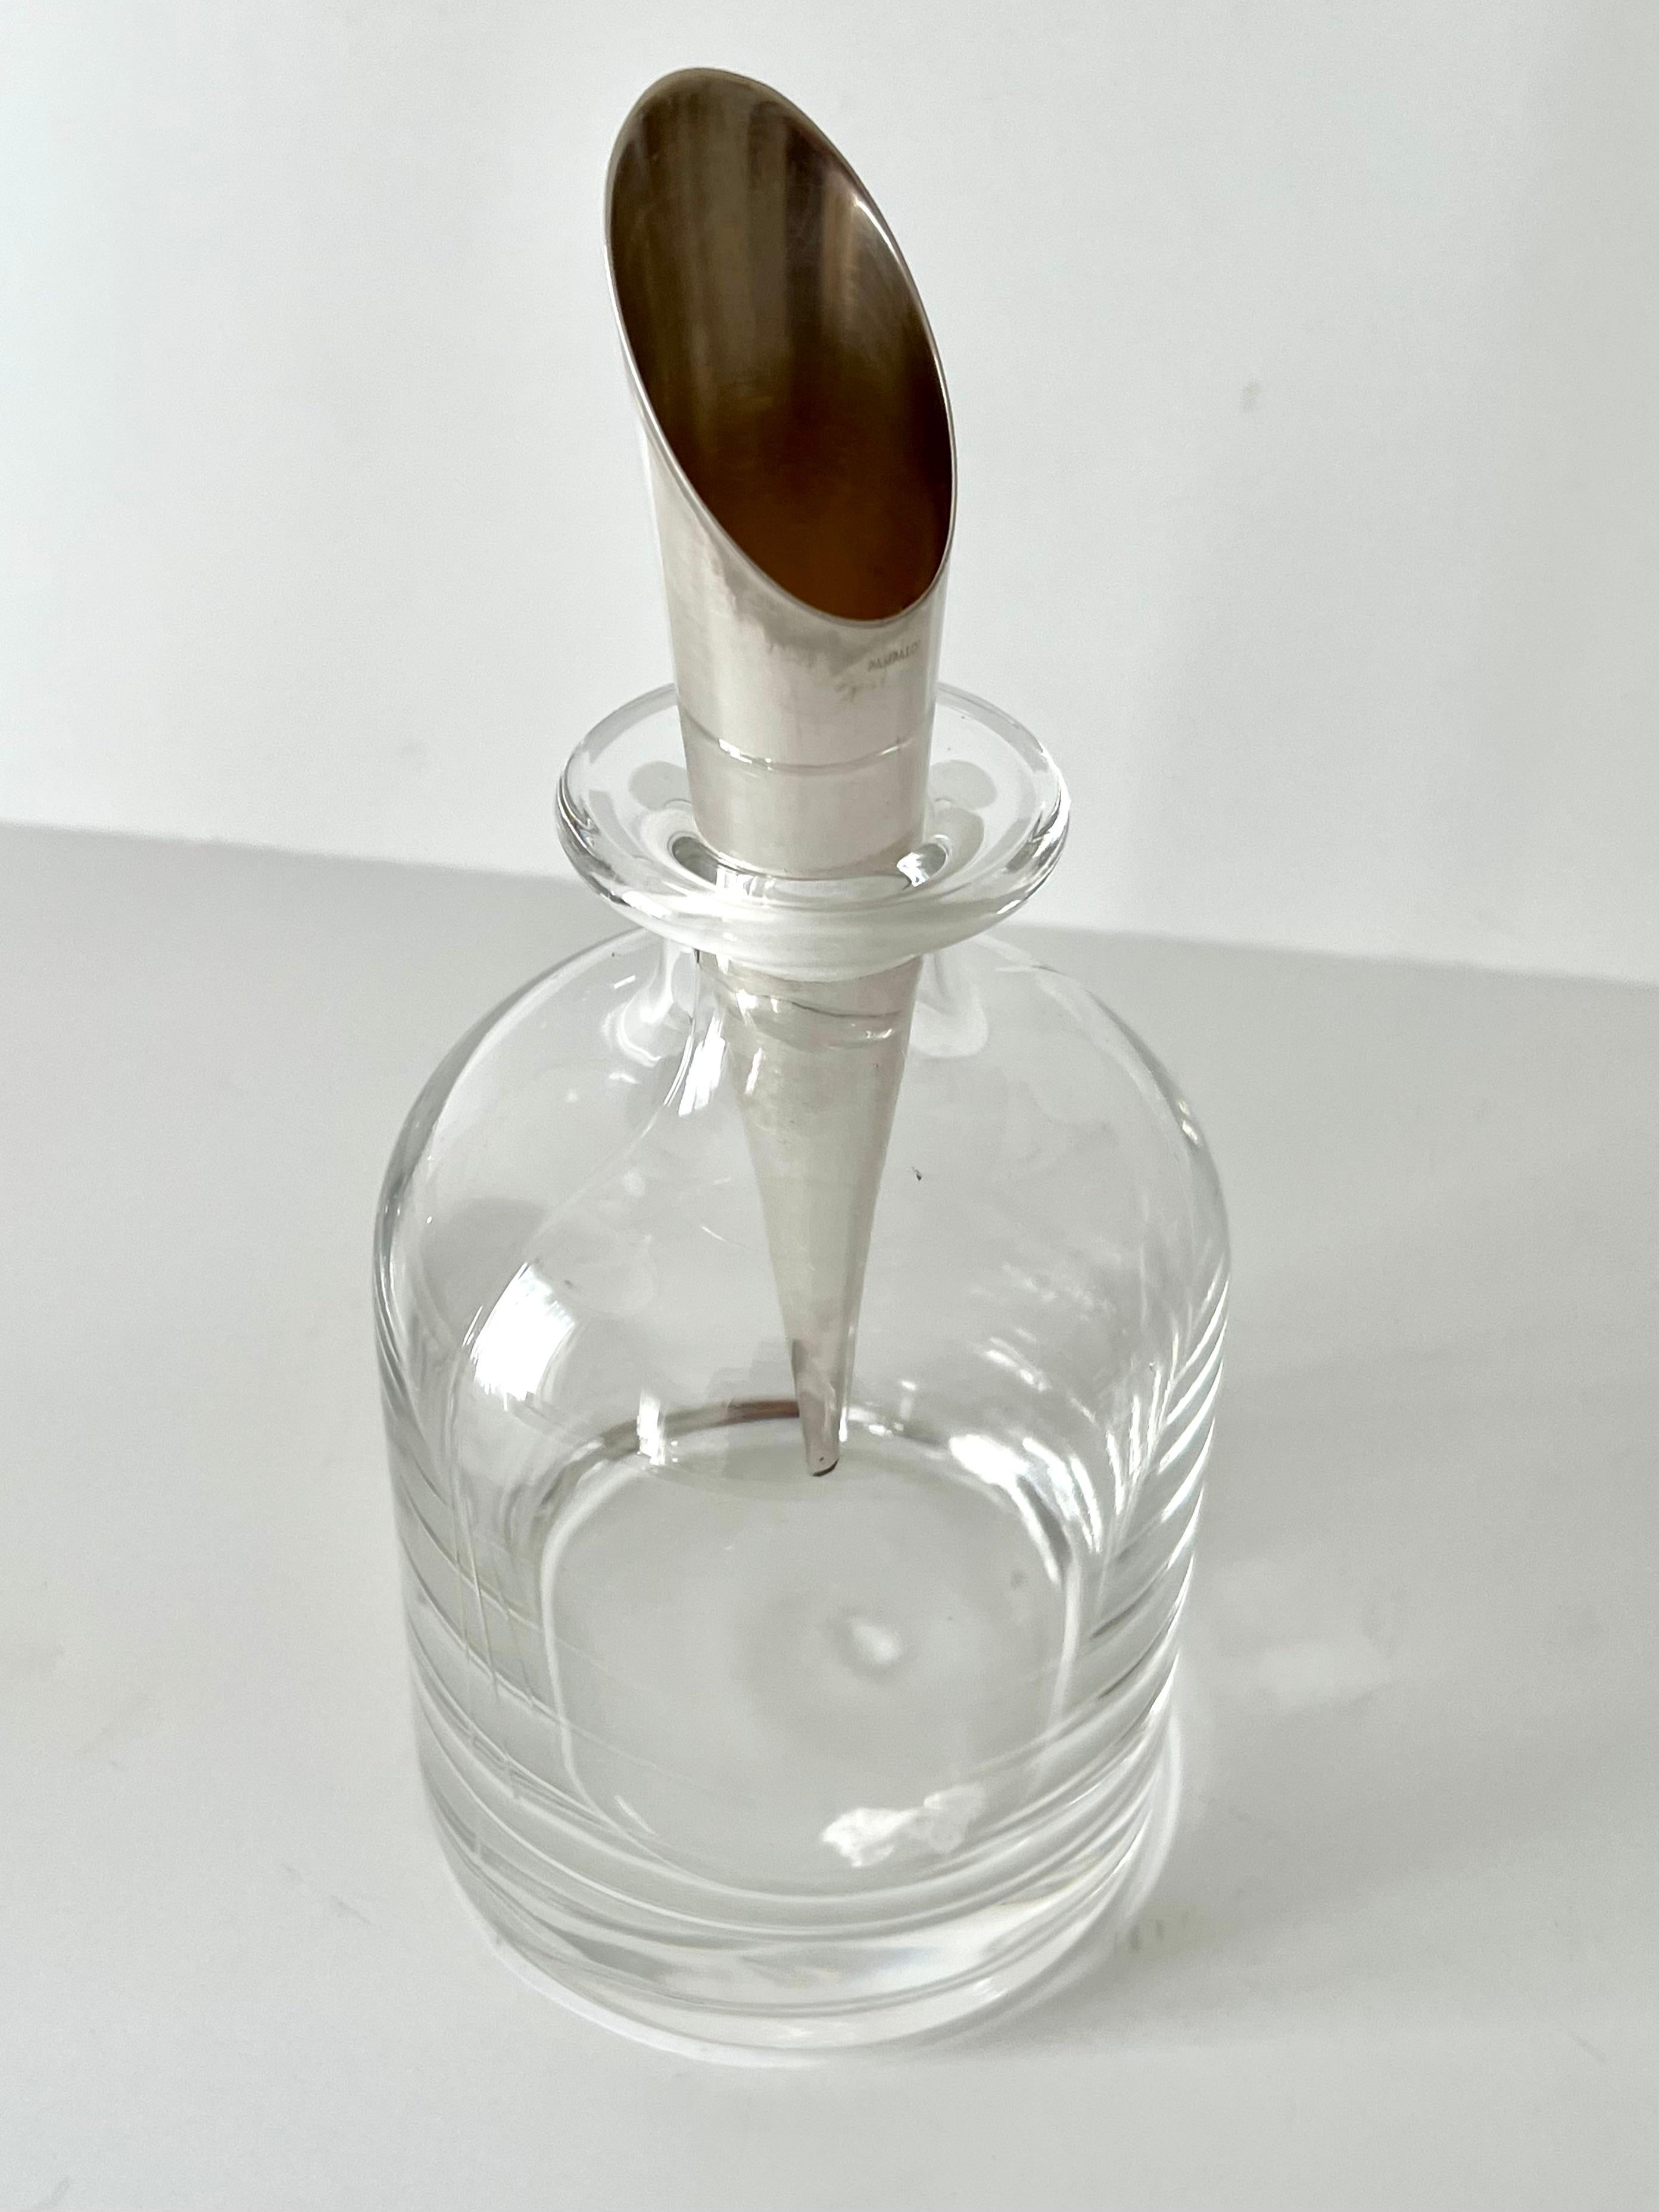 Very hard to find -- Crystal Italian Pampaloni decanter with sterling silver stopper

The one shown has a unique Sterling Silver stopper of a Cone or Funnel, which comes in handy as a bartender... A wonderful decorative element for any room, or